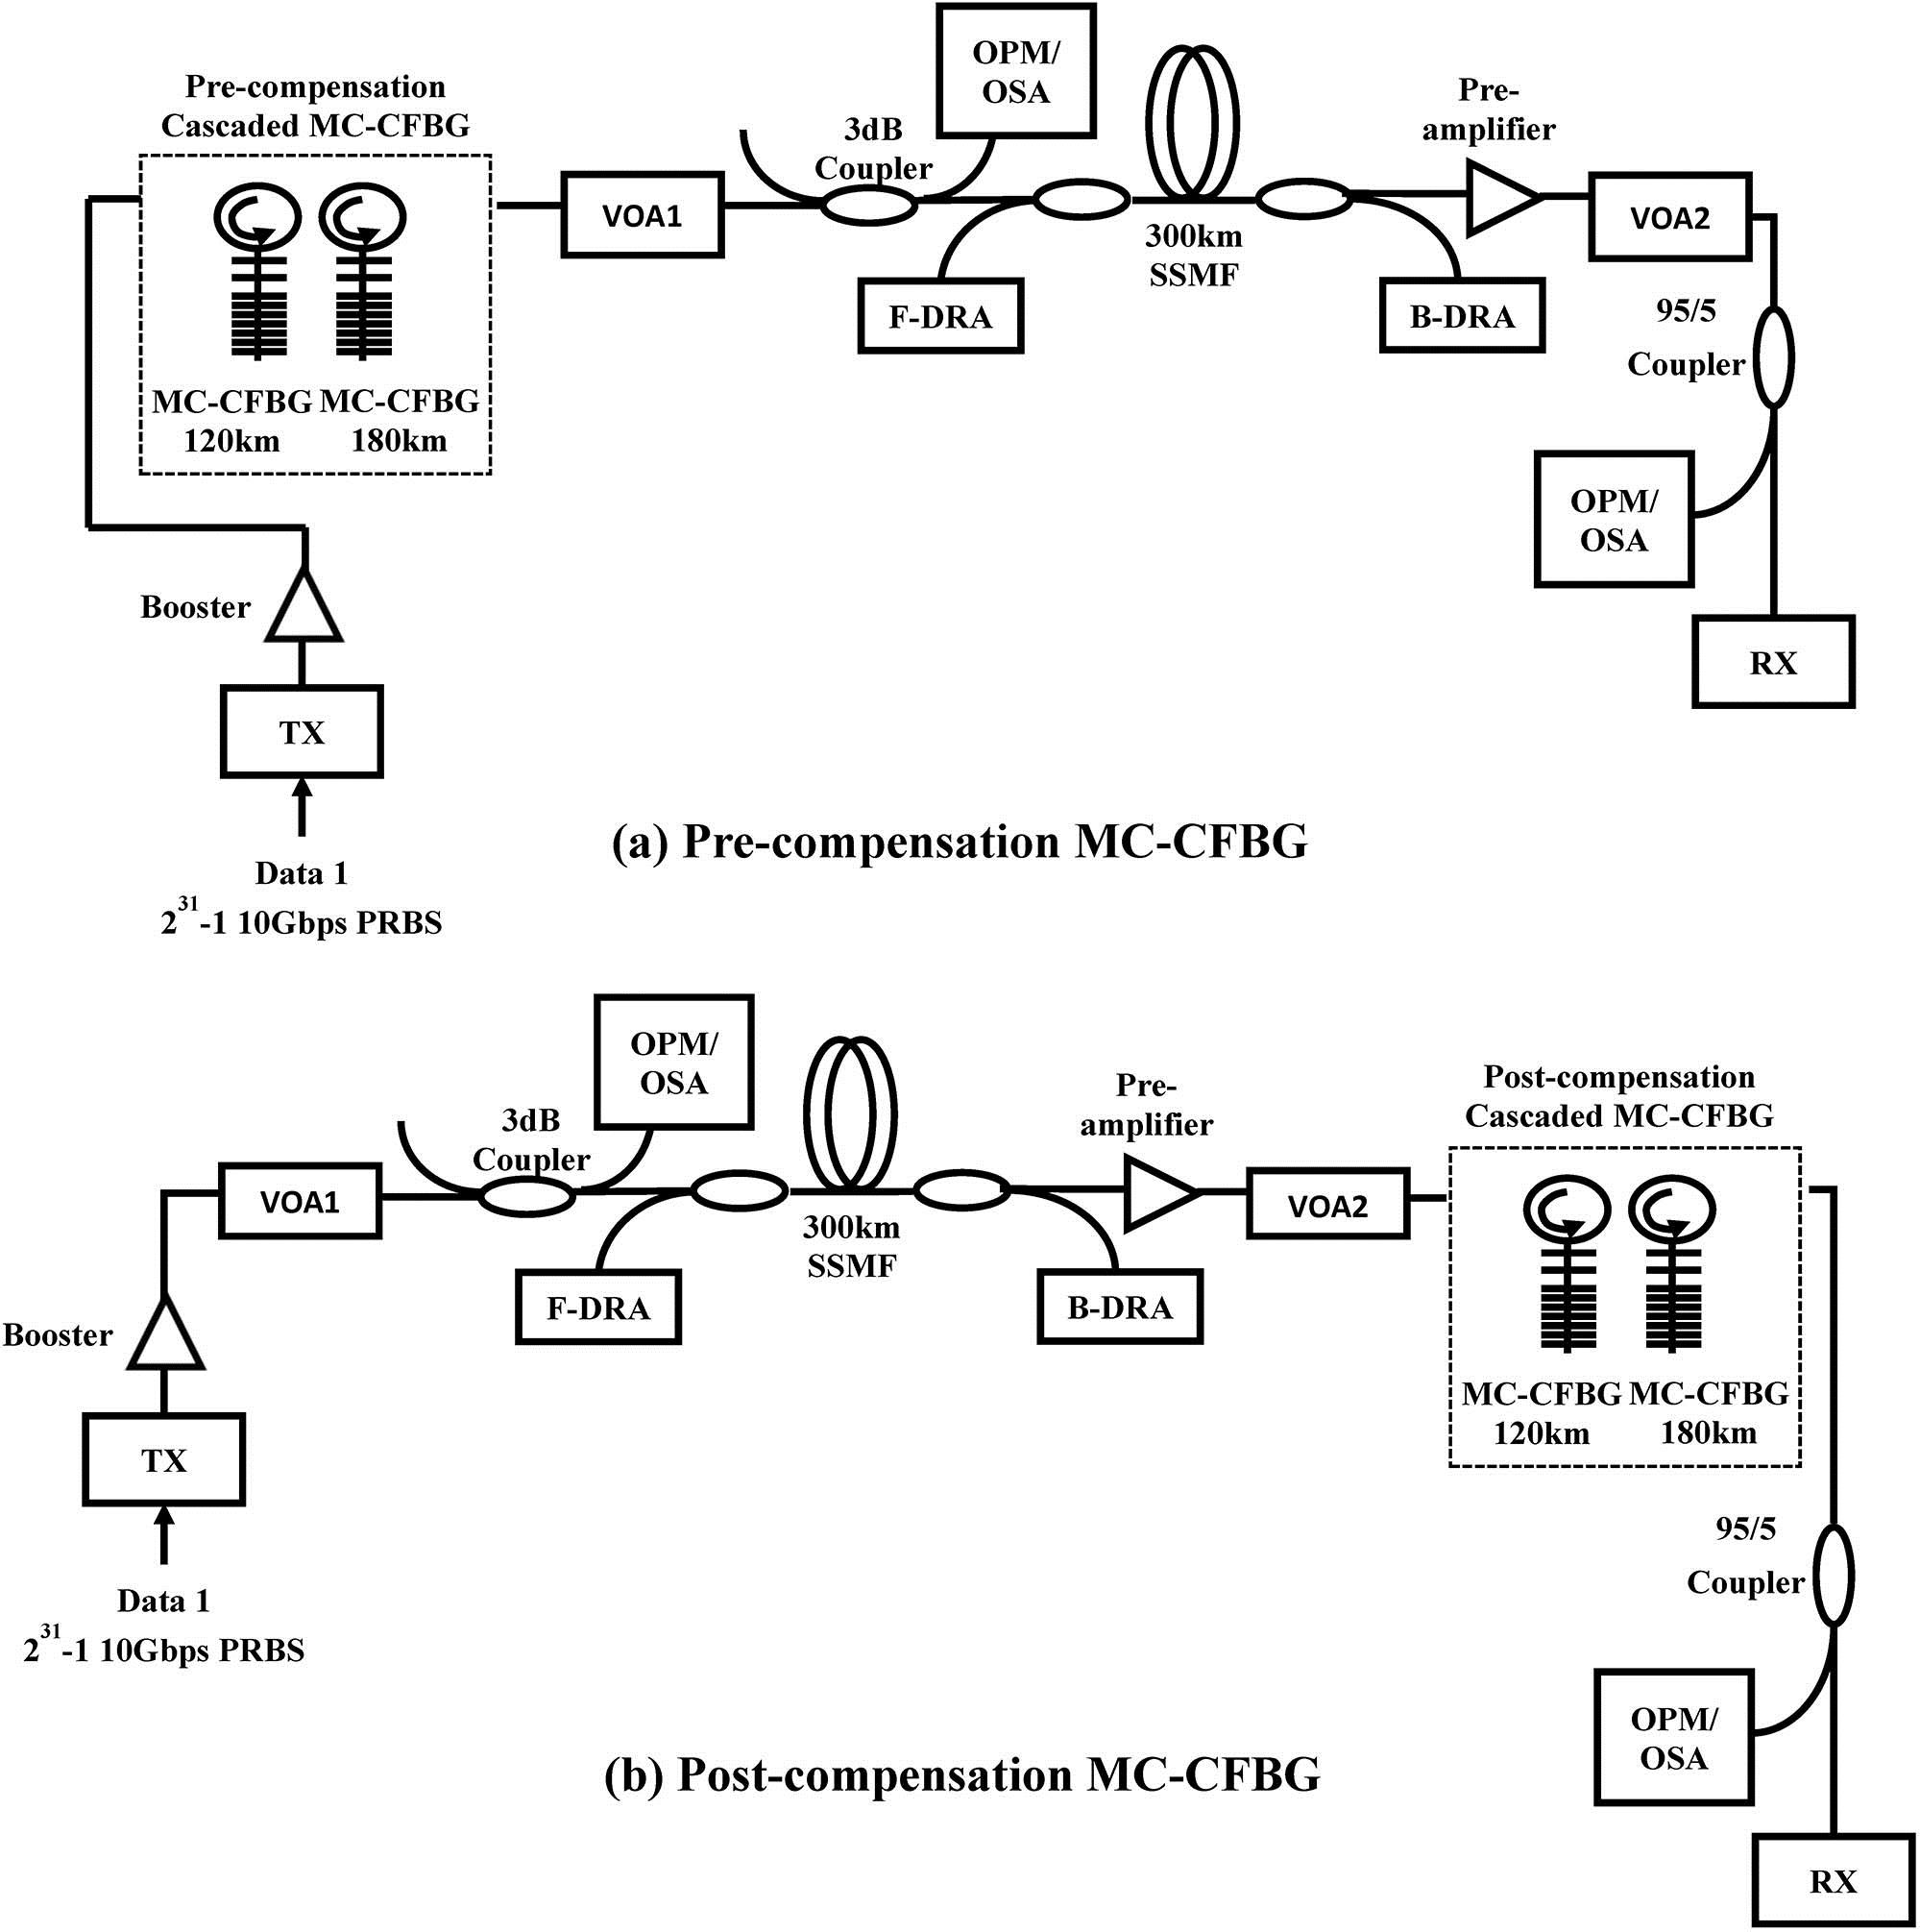 Experimental setup: (a) pre-compensation and (b) post-compensation cascaded MC-CFBG of single-channel 10 Gbps repeaterless transmission system over 300 km SSMF.